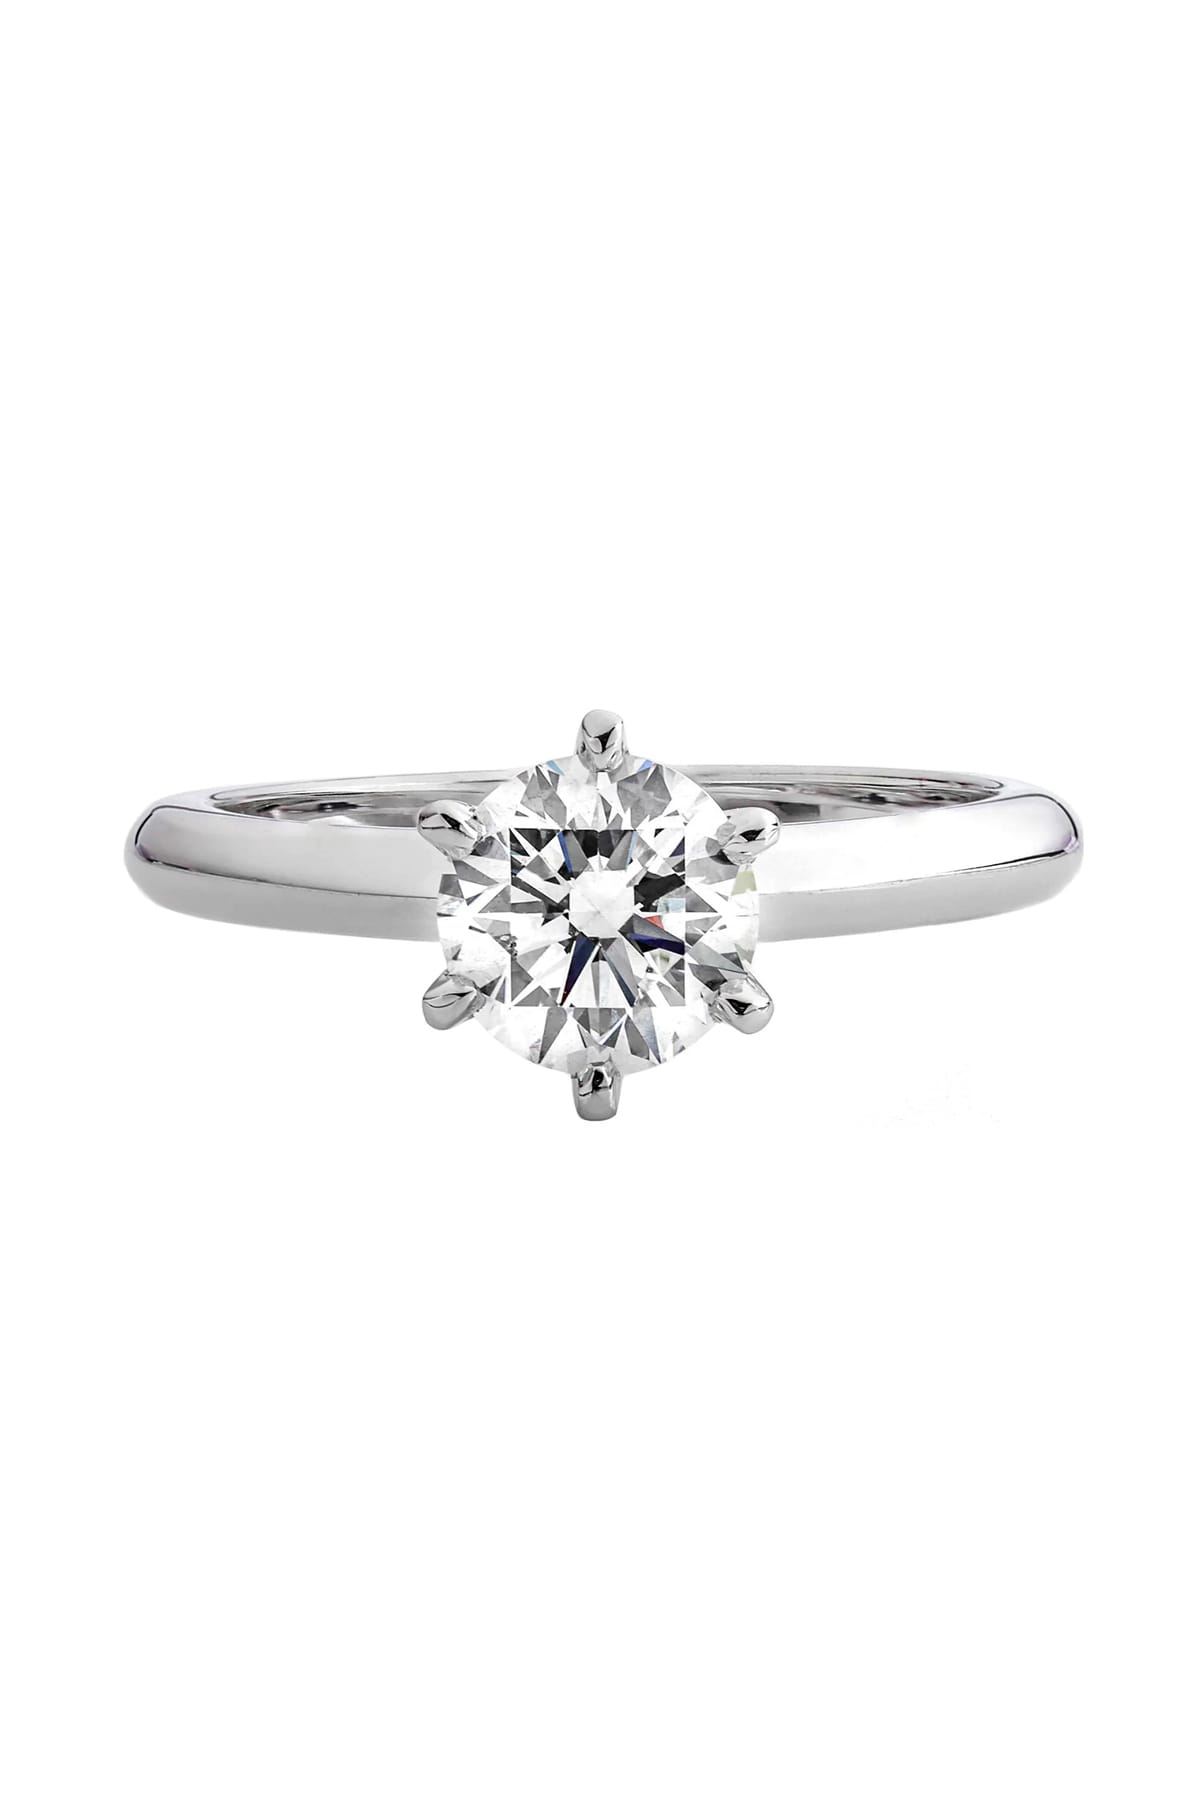 LeGassick 1.20 carat Diamond Solitaire Engagement Ring in solid 18 carat white gold